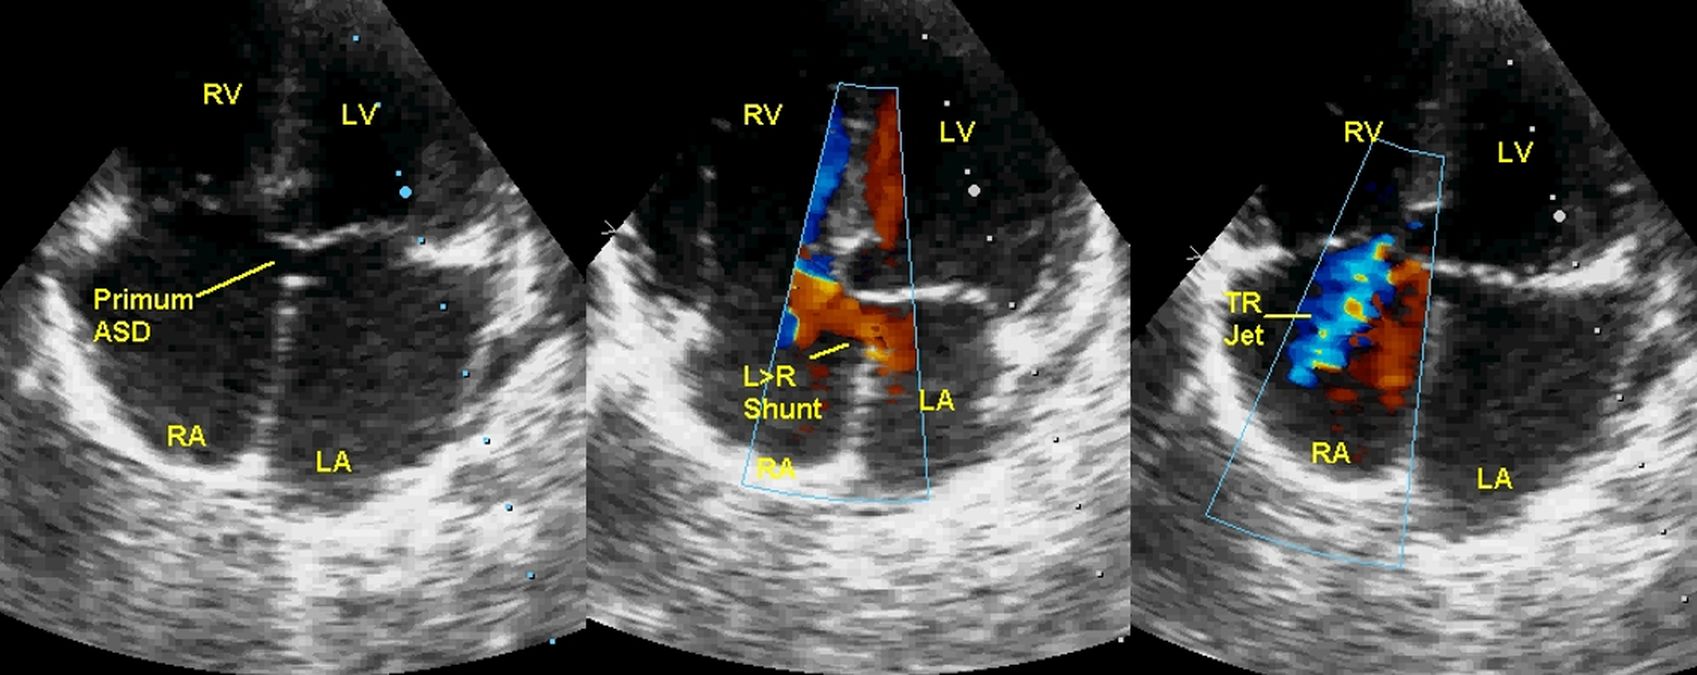 Echocardiogram from the apical four chamber view